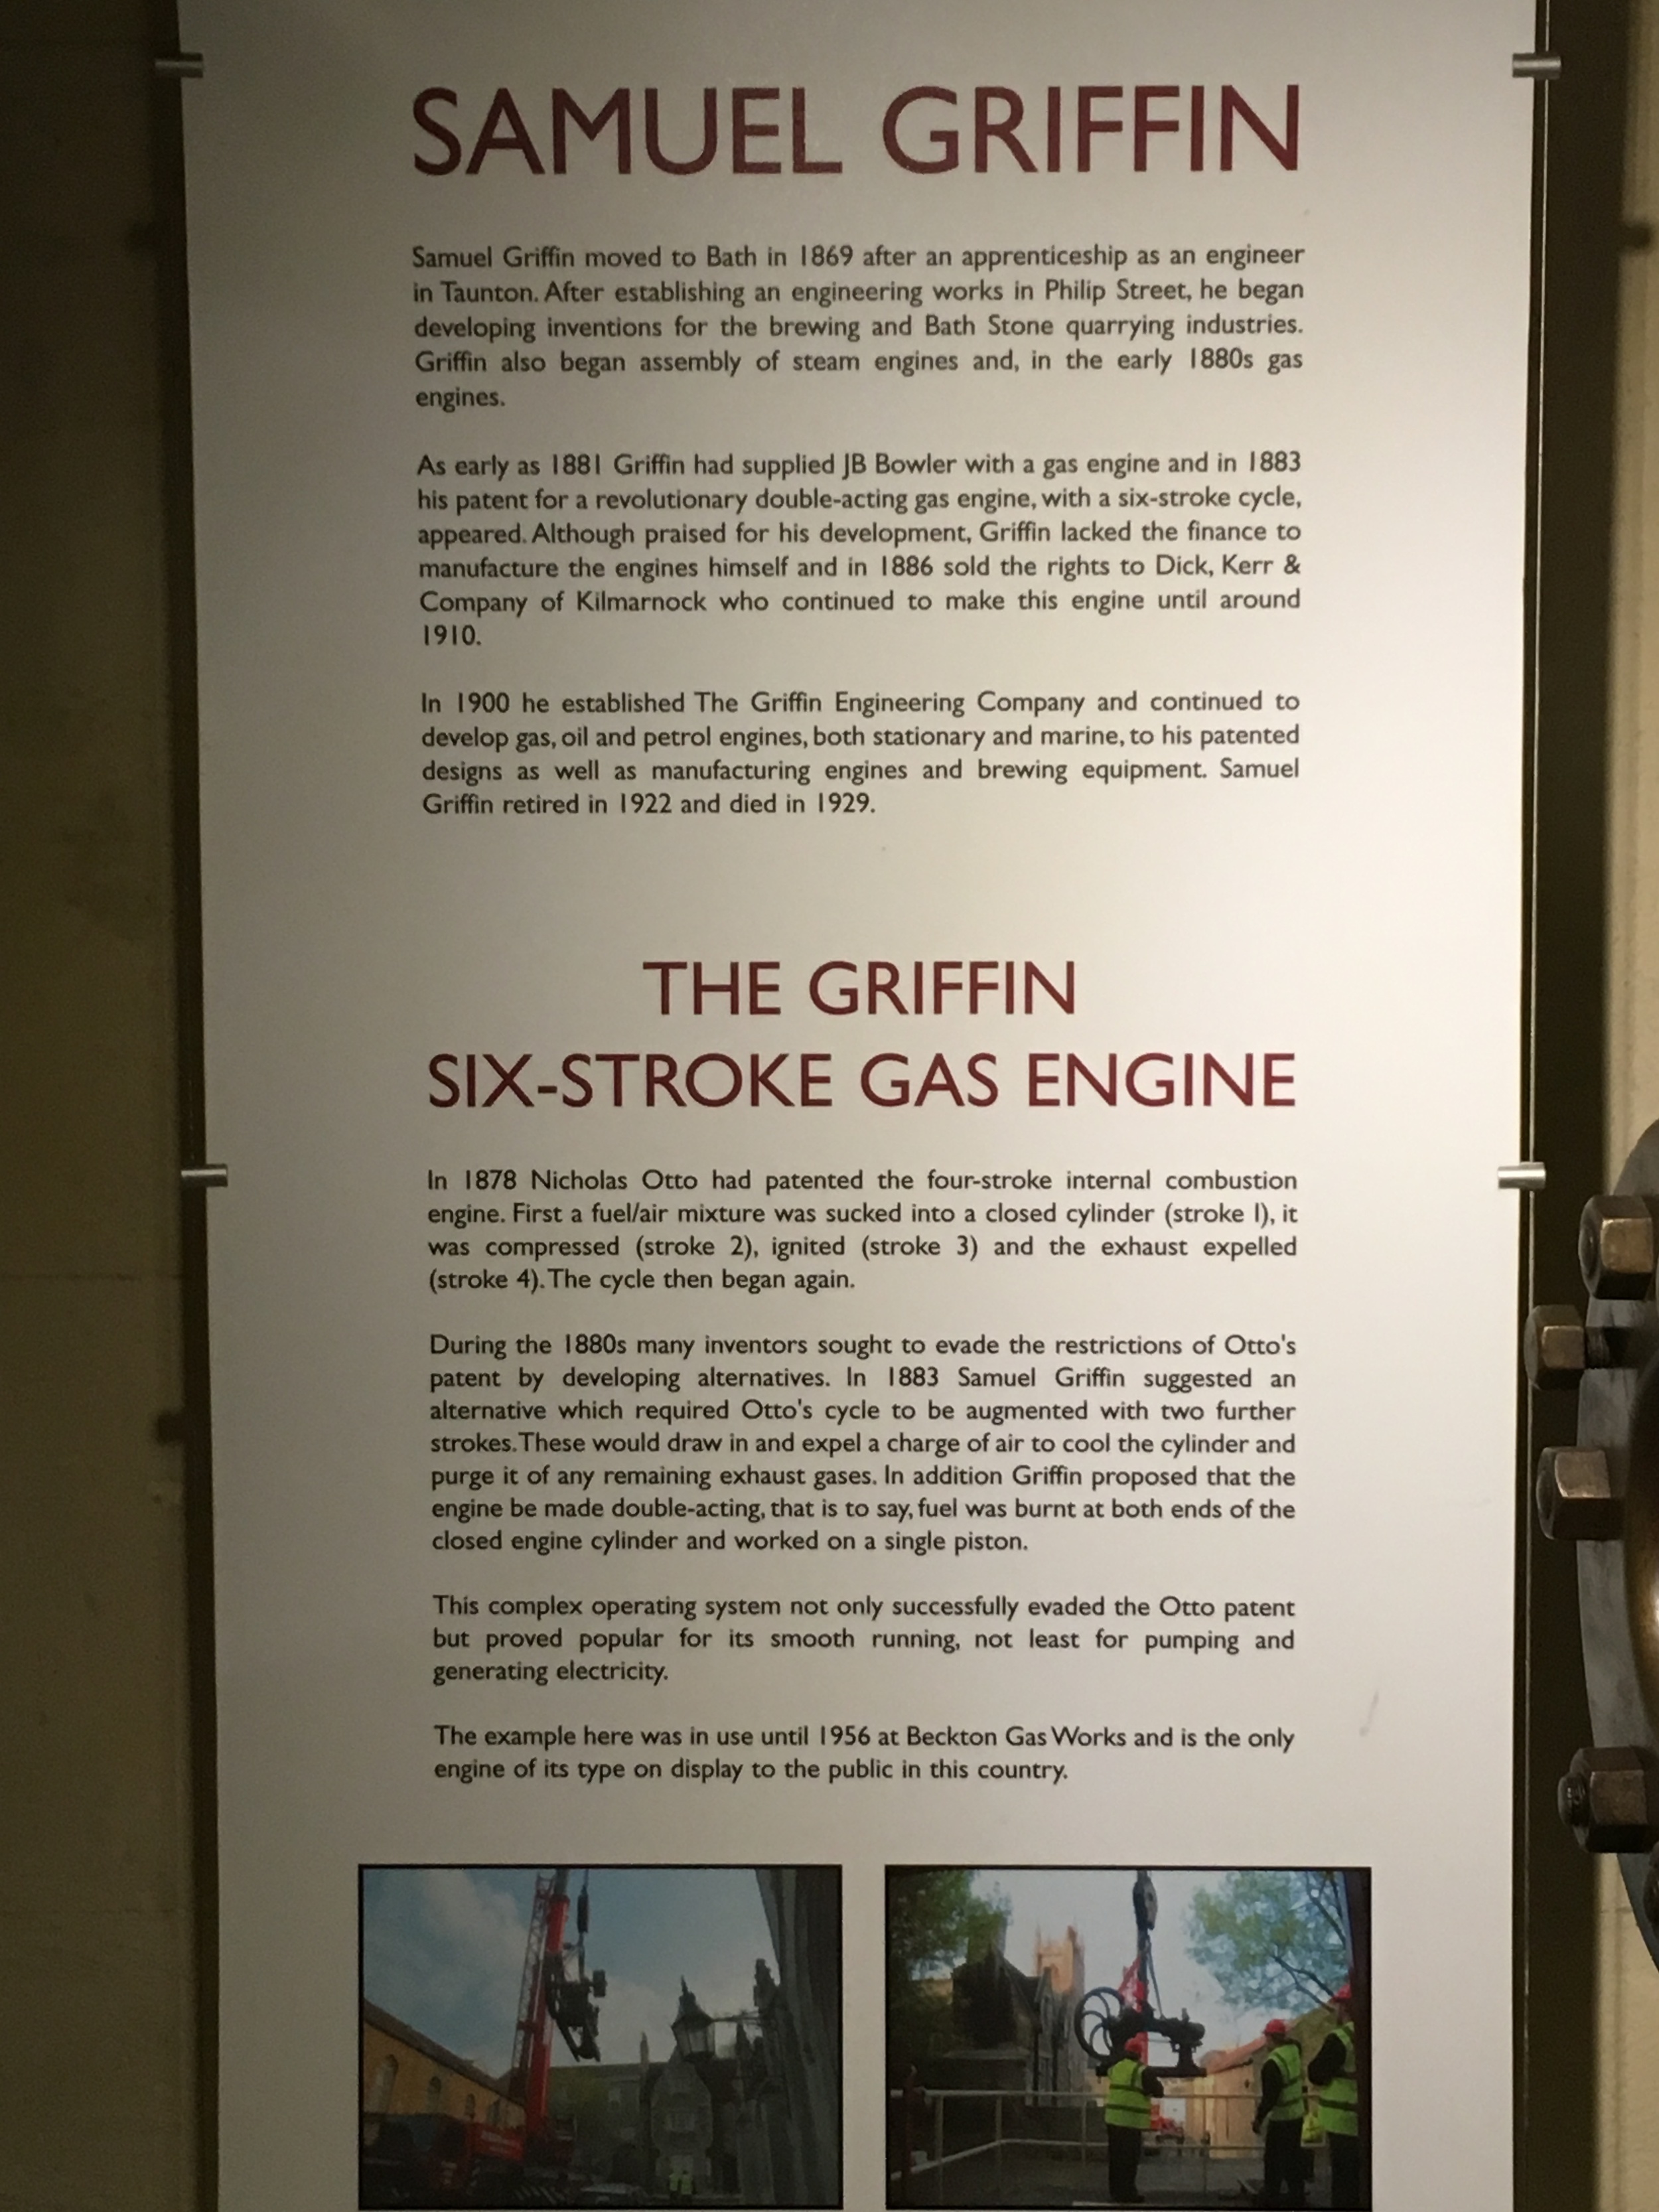  Details on the invention and use of the Griffin Engine. 